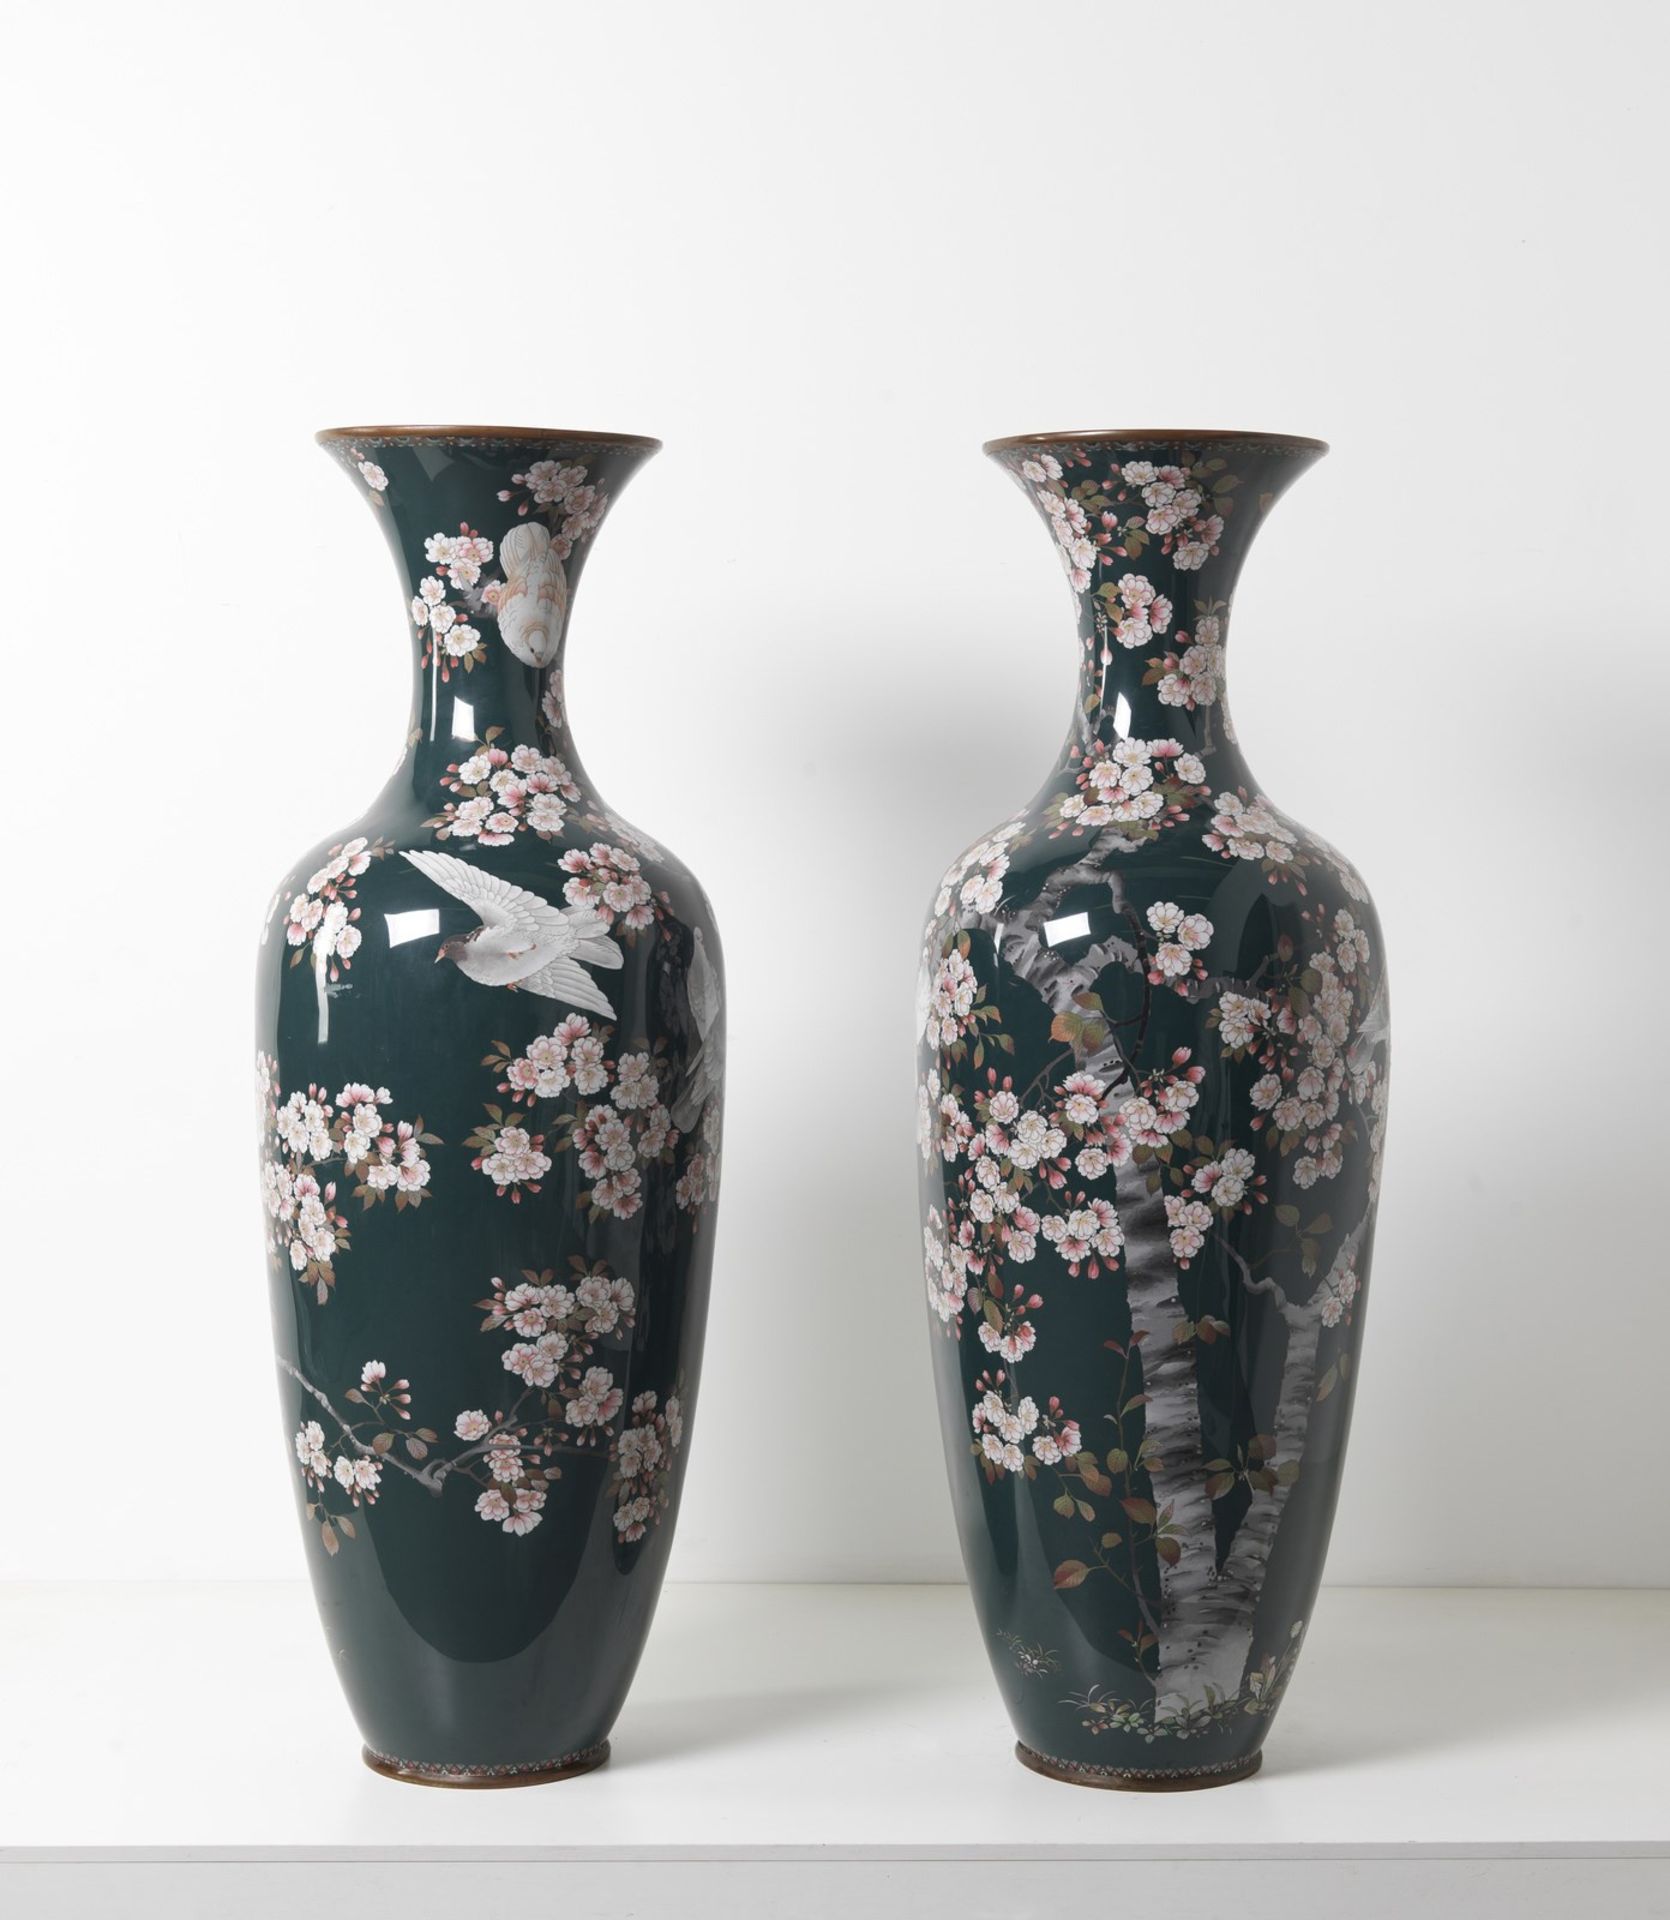 ARTE GIAPPONESE A pair of monumental cloisonnè vases Japan, Meiji/Taisho period, 19th-20th century - Image 3 of 5